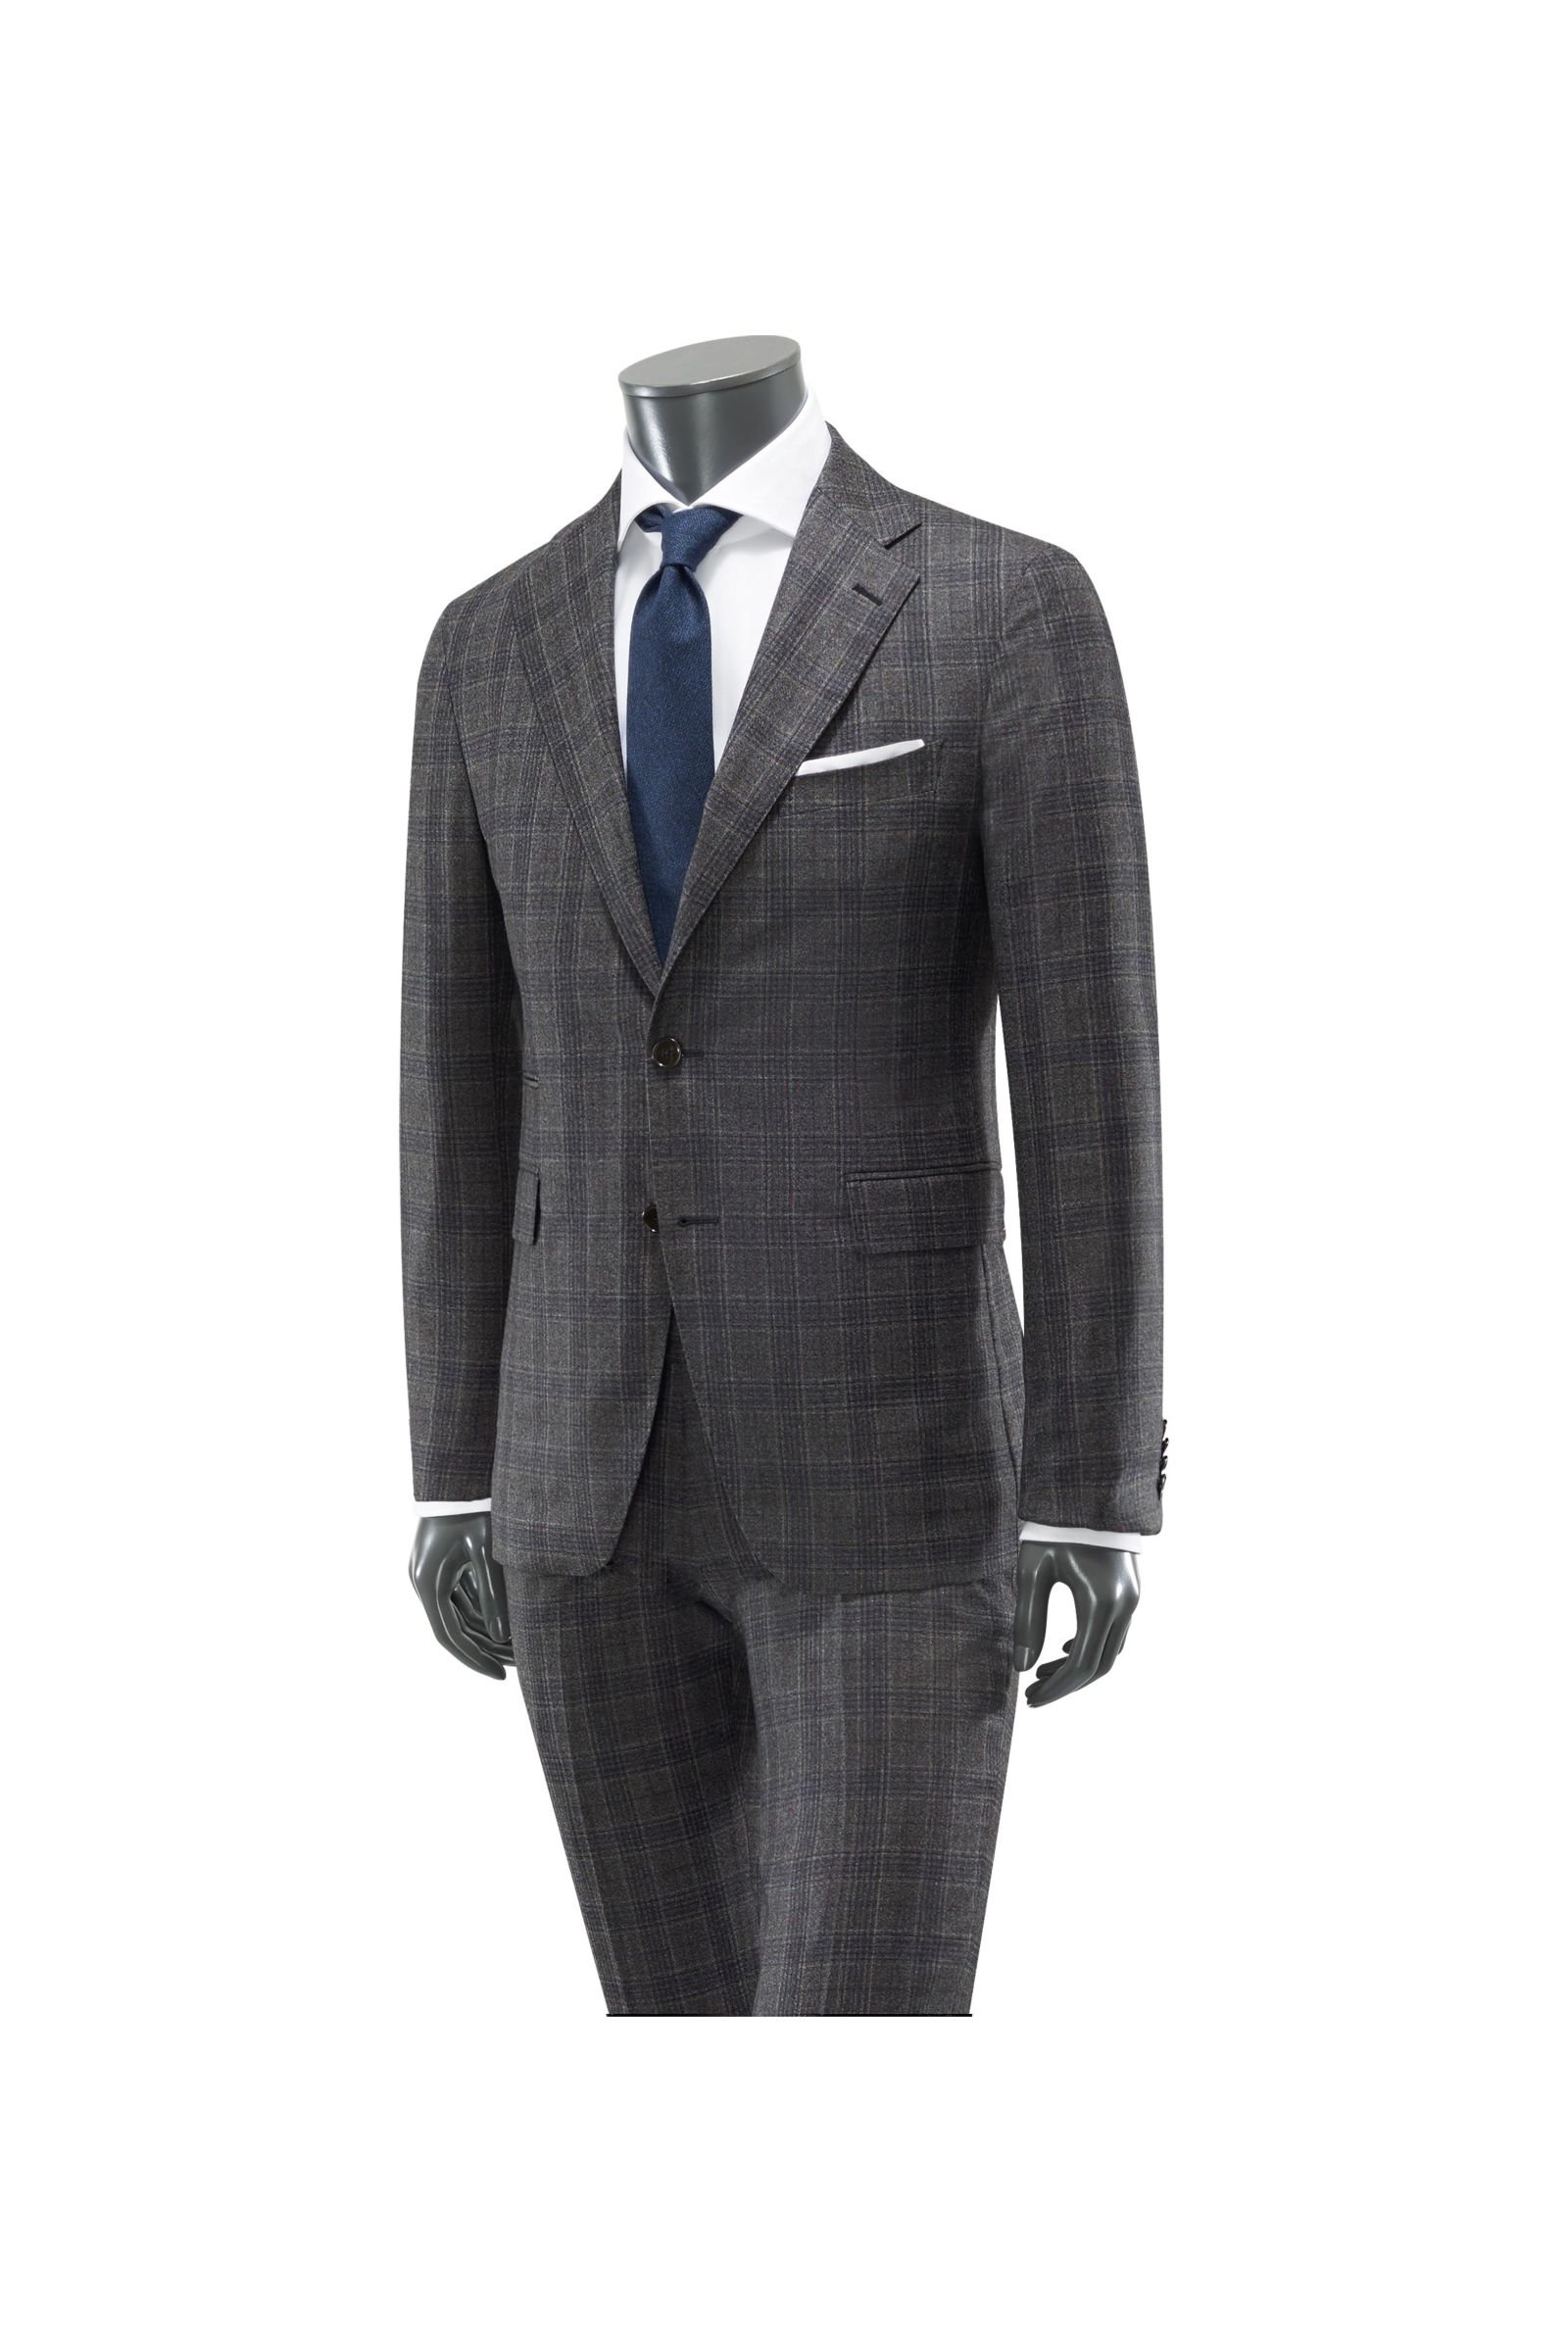 Suit grey-brown checked